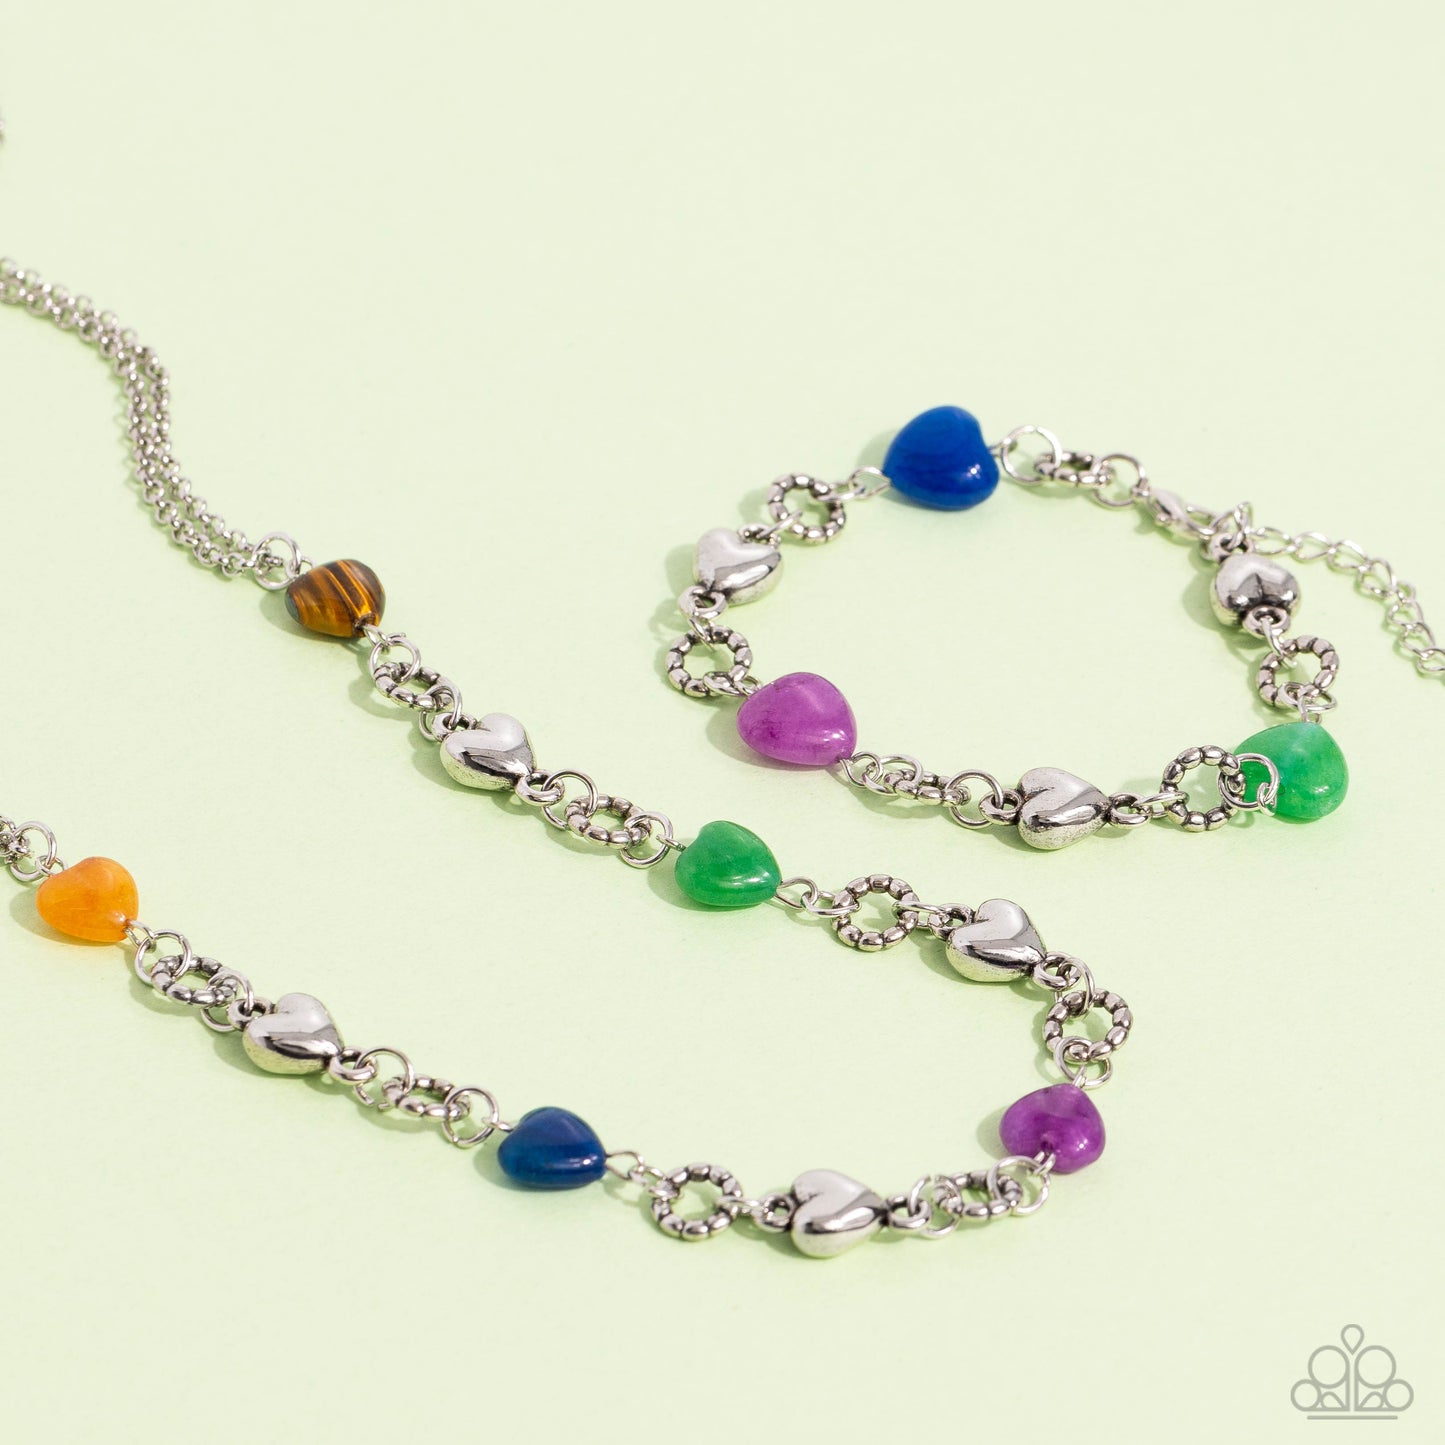 Paparazzi Accessories My HEARTBEAT Will Go On - Multi Heart-shaped lapis, jade, amethyst, tiger's eye, and orange stones and sleek silver hearts alternate along the neckline from a double strand of shimmery silver chains. Bubbly textured silver rings sepa